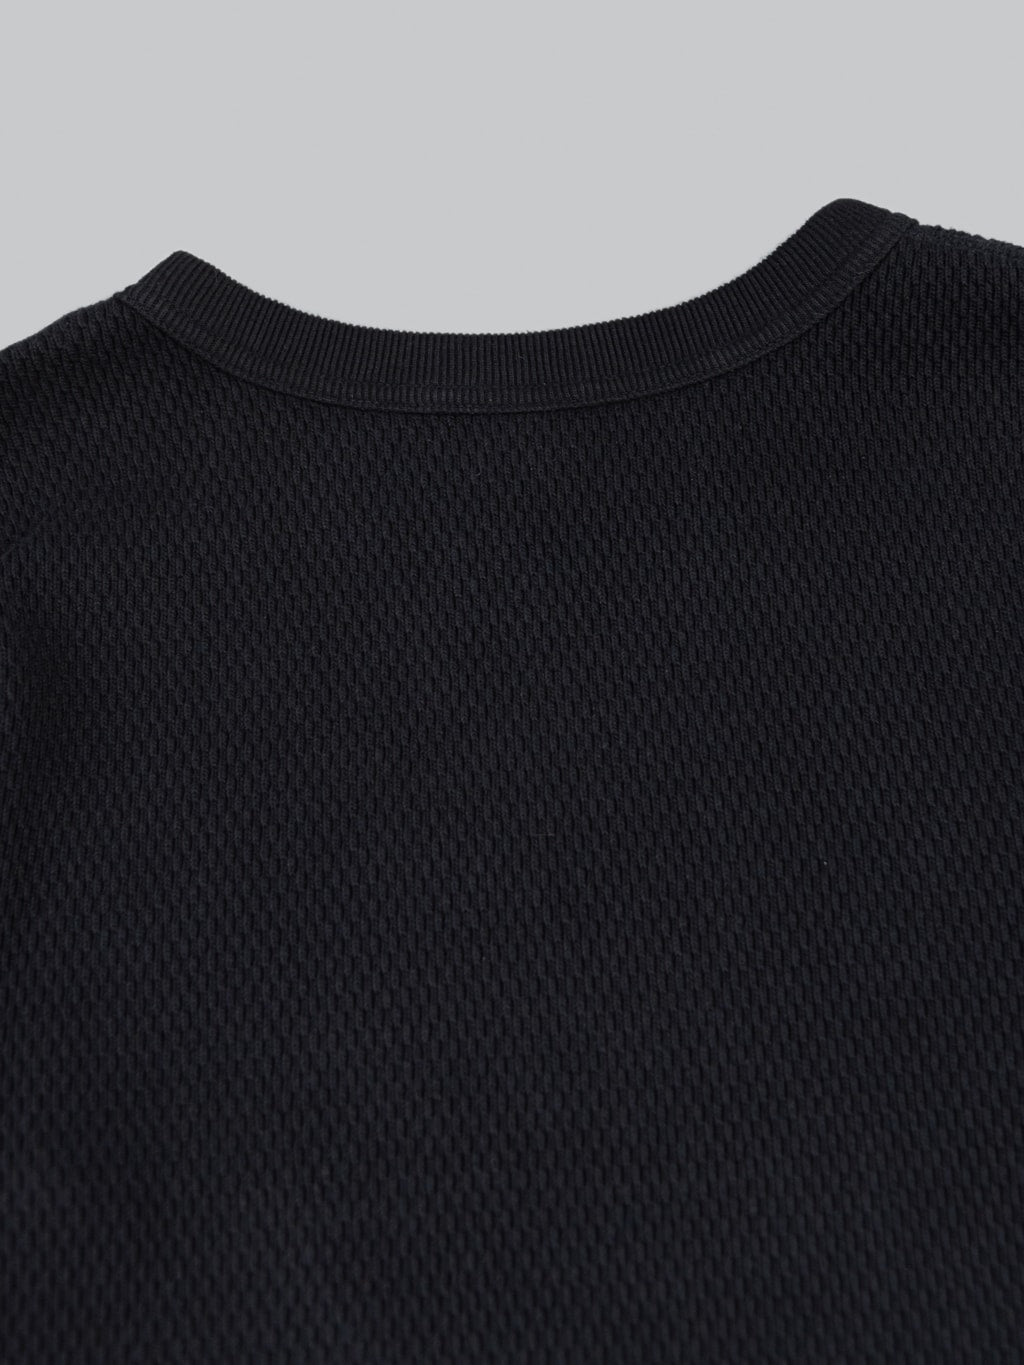 UES Double Honeycomb Thermal TShirt Black back collar